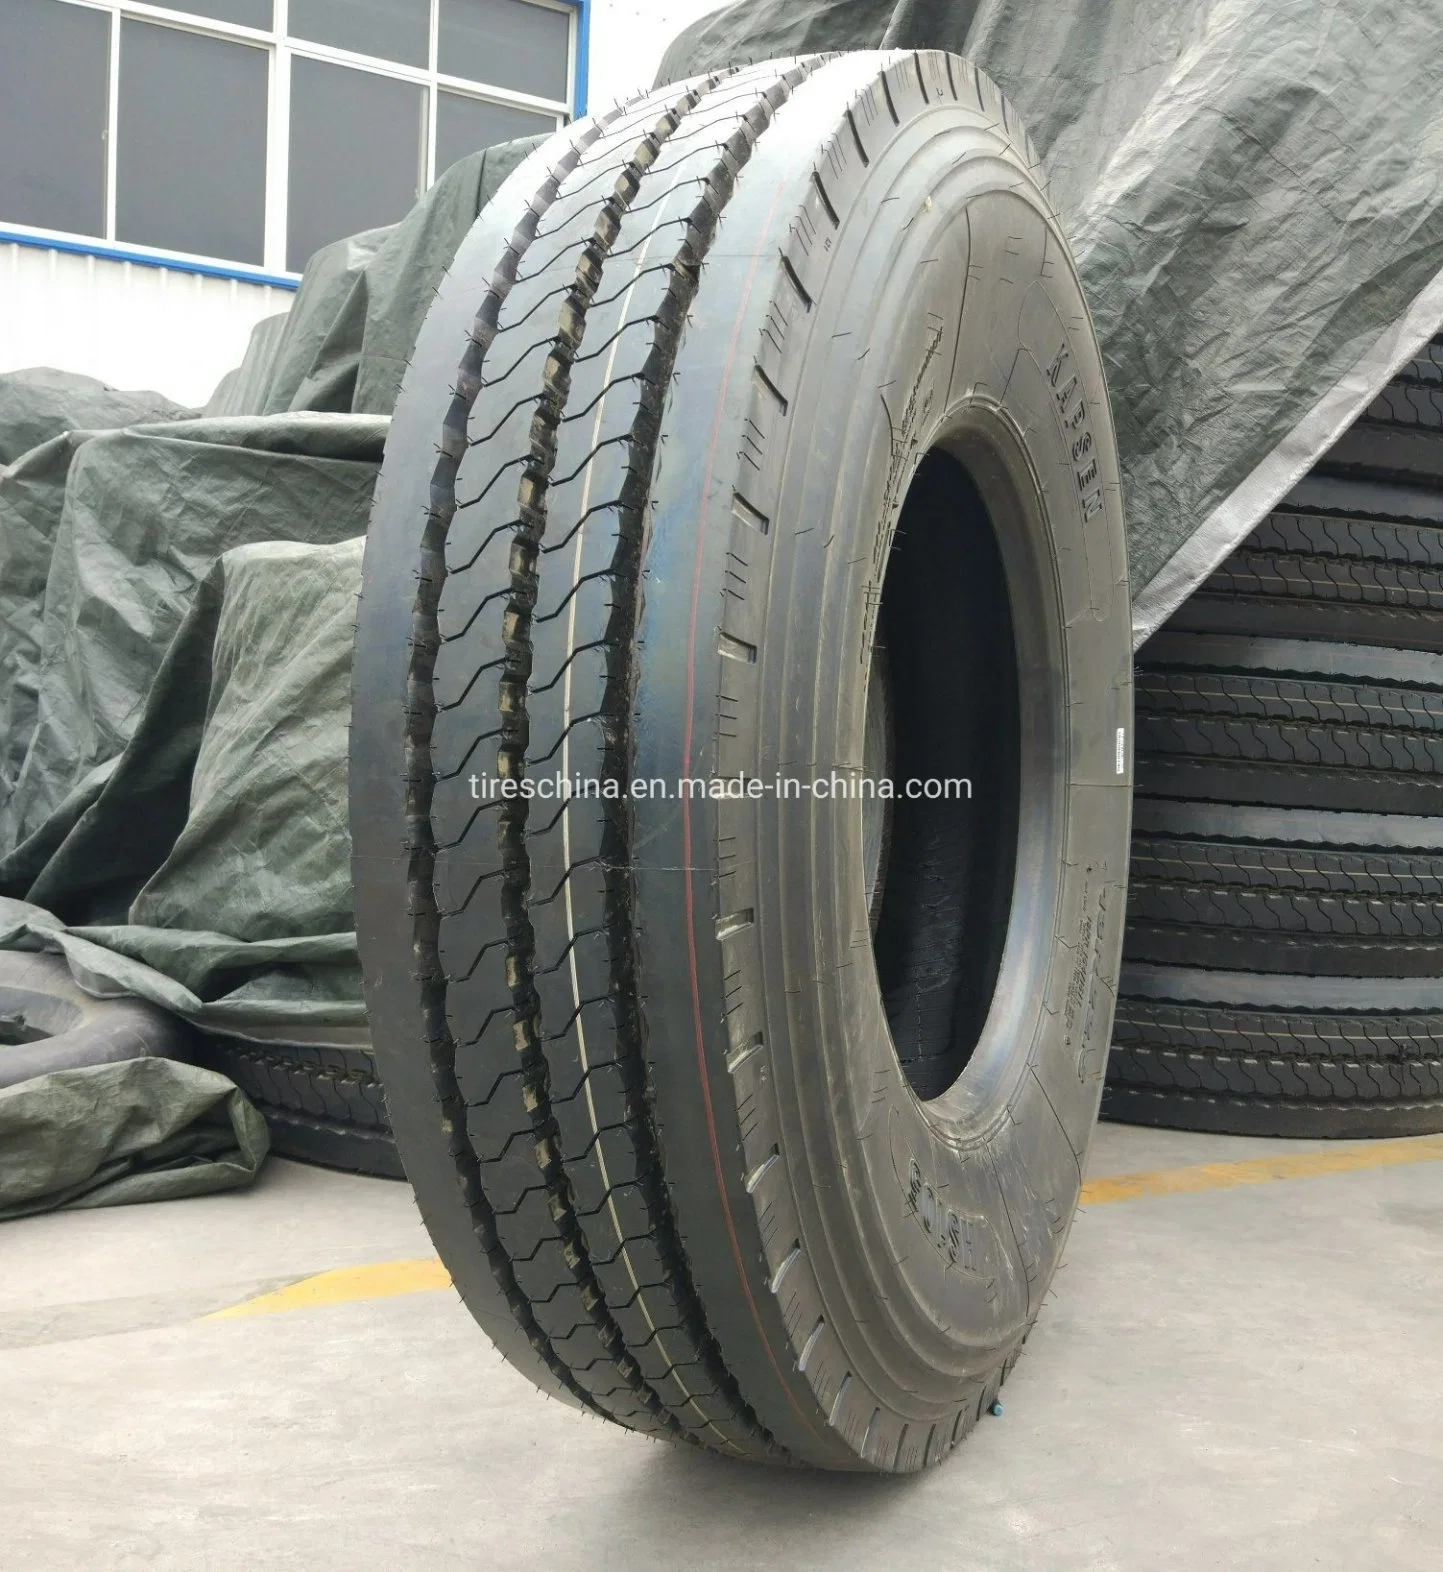 Wholesale/Supplierr Kapsen/Taitong/Terraking Factory TBR Tyre Price 13/22.5 13r22.5-18pr HS105 154/151L All Steel All Wheel Position Heavy Truck and Bus Radial Tire